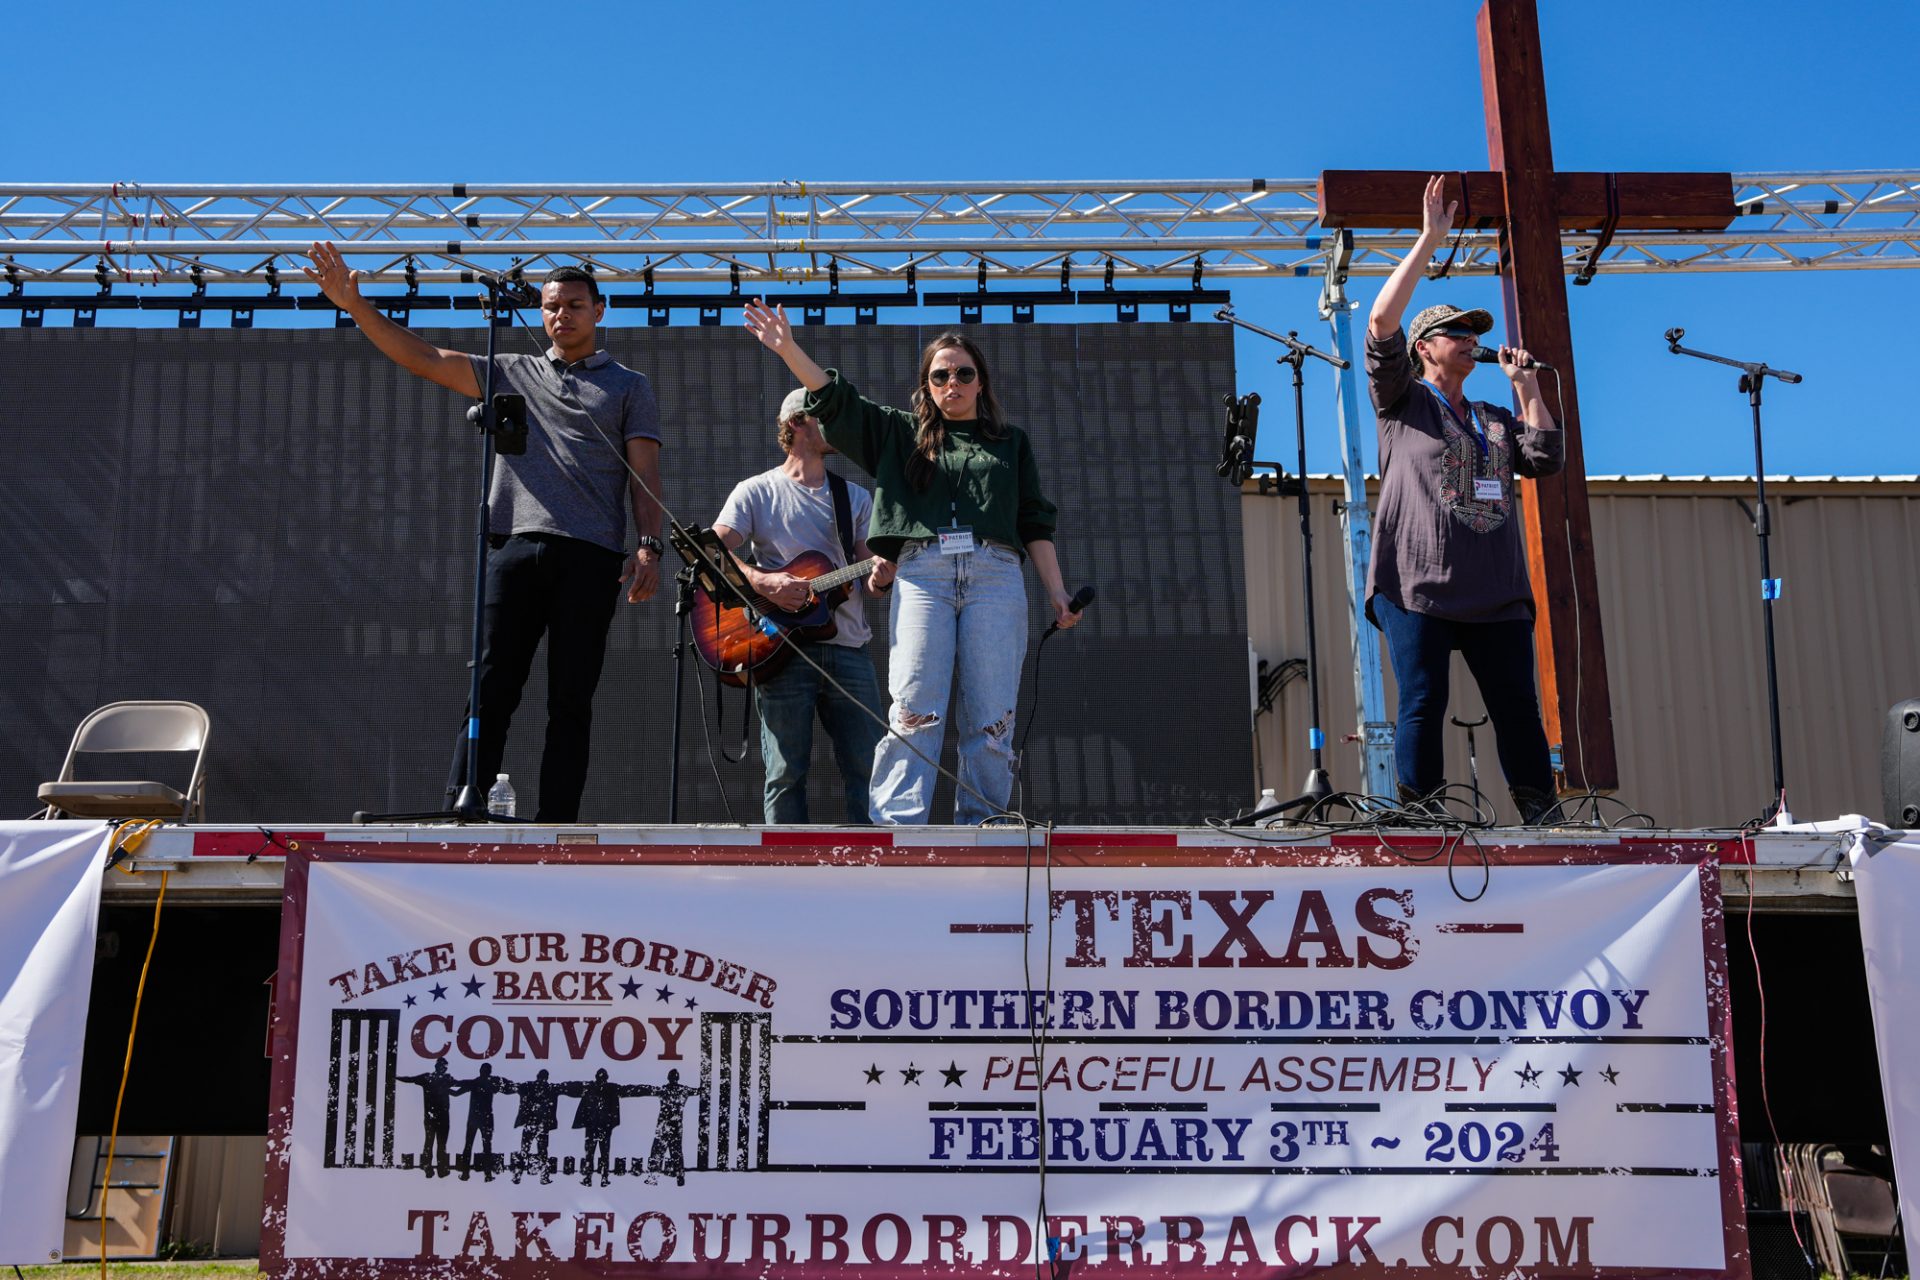 A Trump rally, without Trump: Conservatives demand border security in Texas